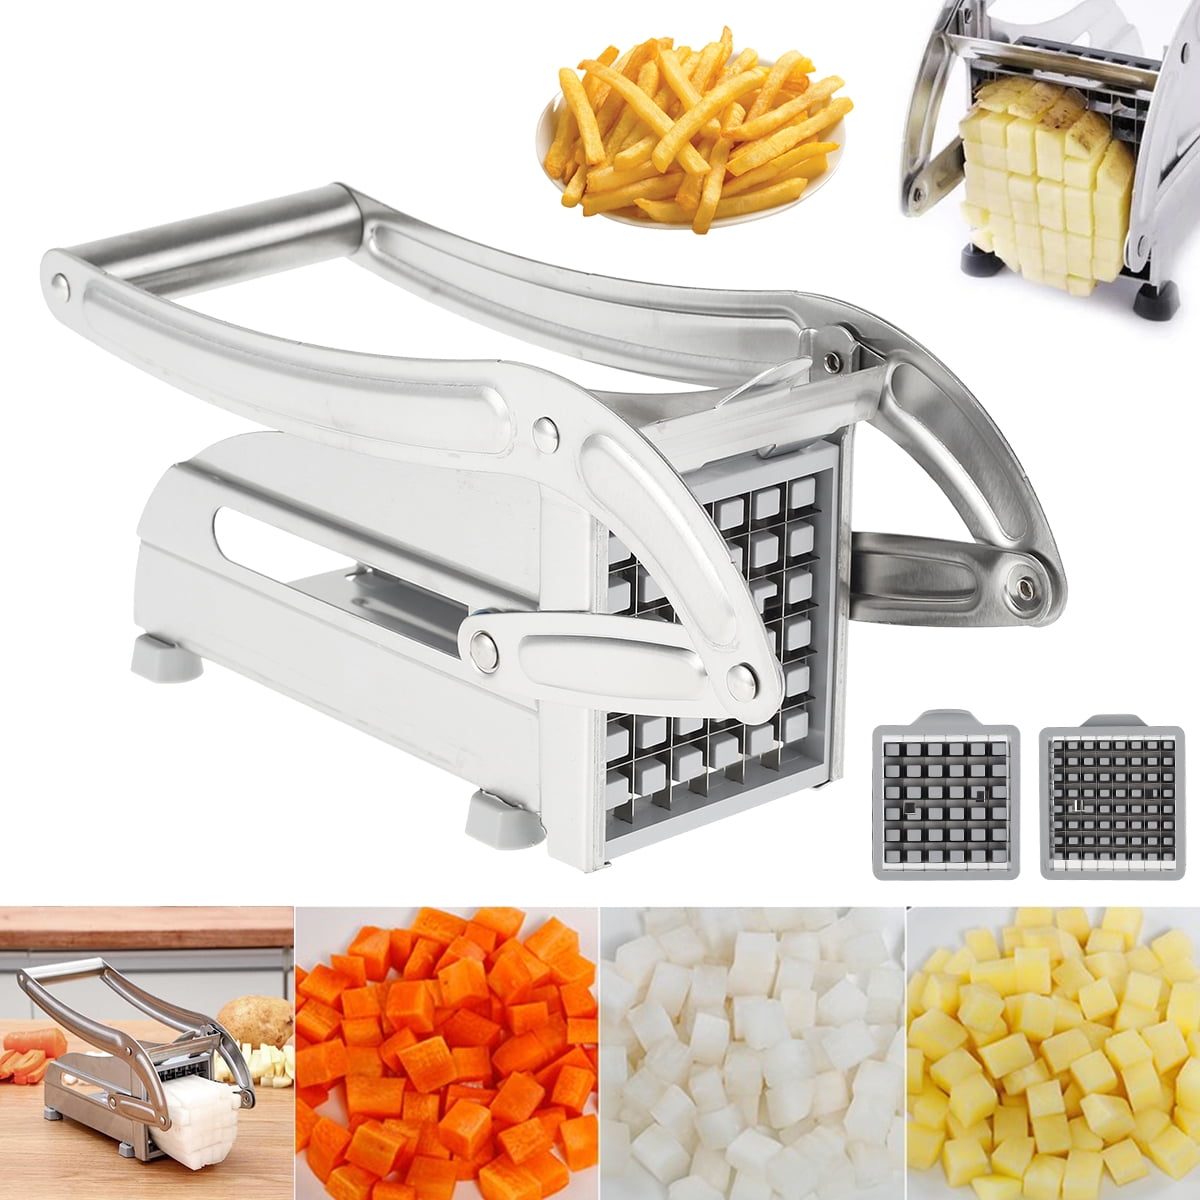 Daily Boutik Vegetables Slicer Potato Cutter Commercial French Fry Slicer  Cutters - 13.78 x 8.07 x 9.45 - Bed Bath & Beyond - 35365357